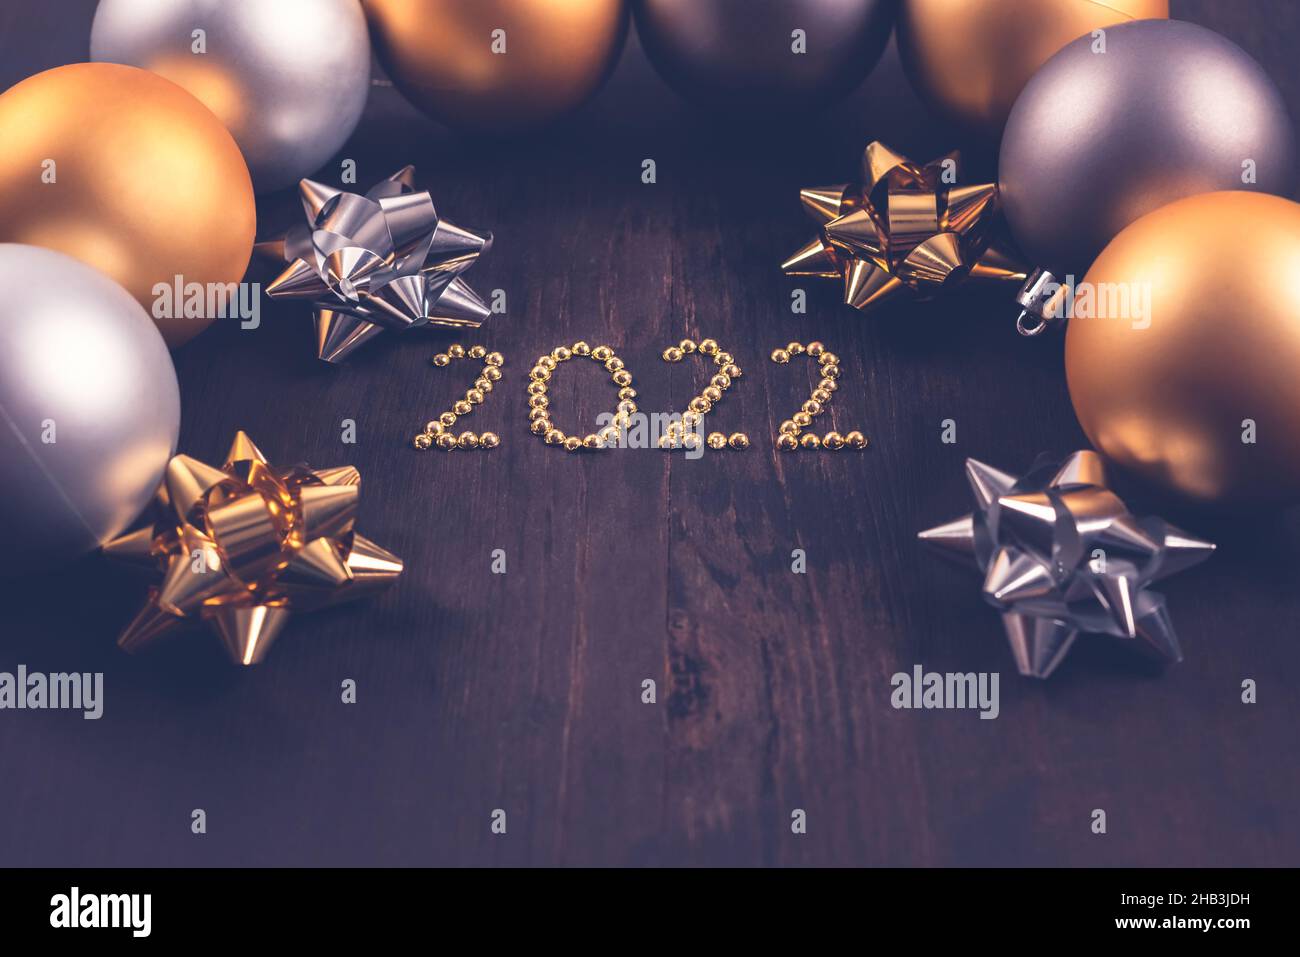 2022 Happy New Year. Christmas concept and background with ornaments. Stock Photo